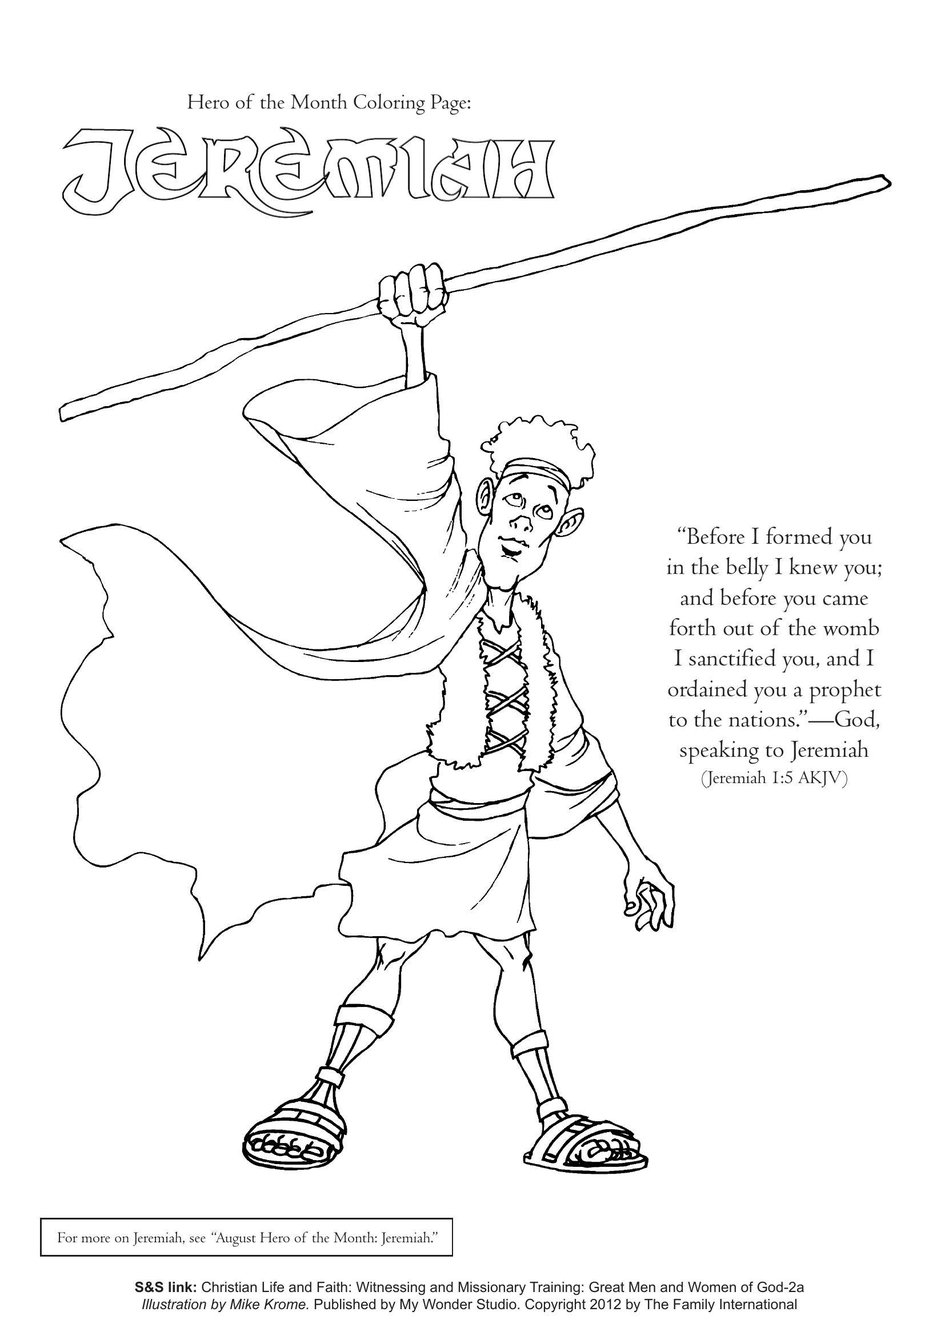 Coloring Page: Hero of the Month - Jeremiah | My Wonder Studio